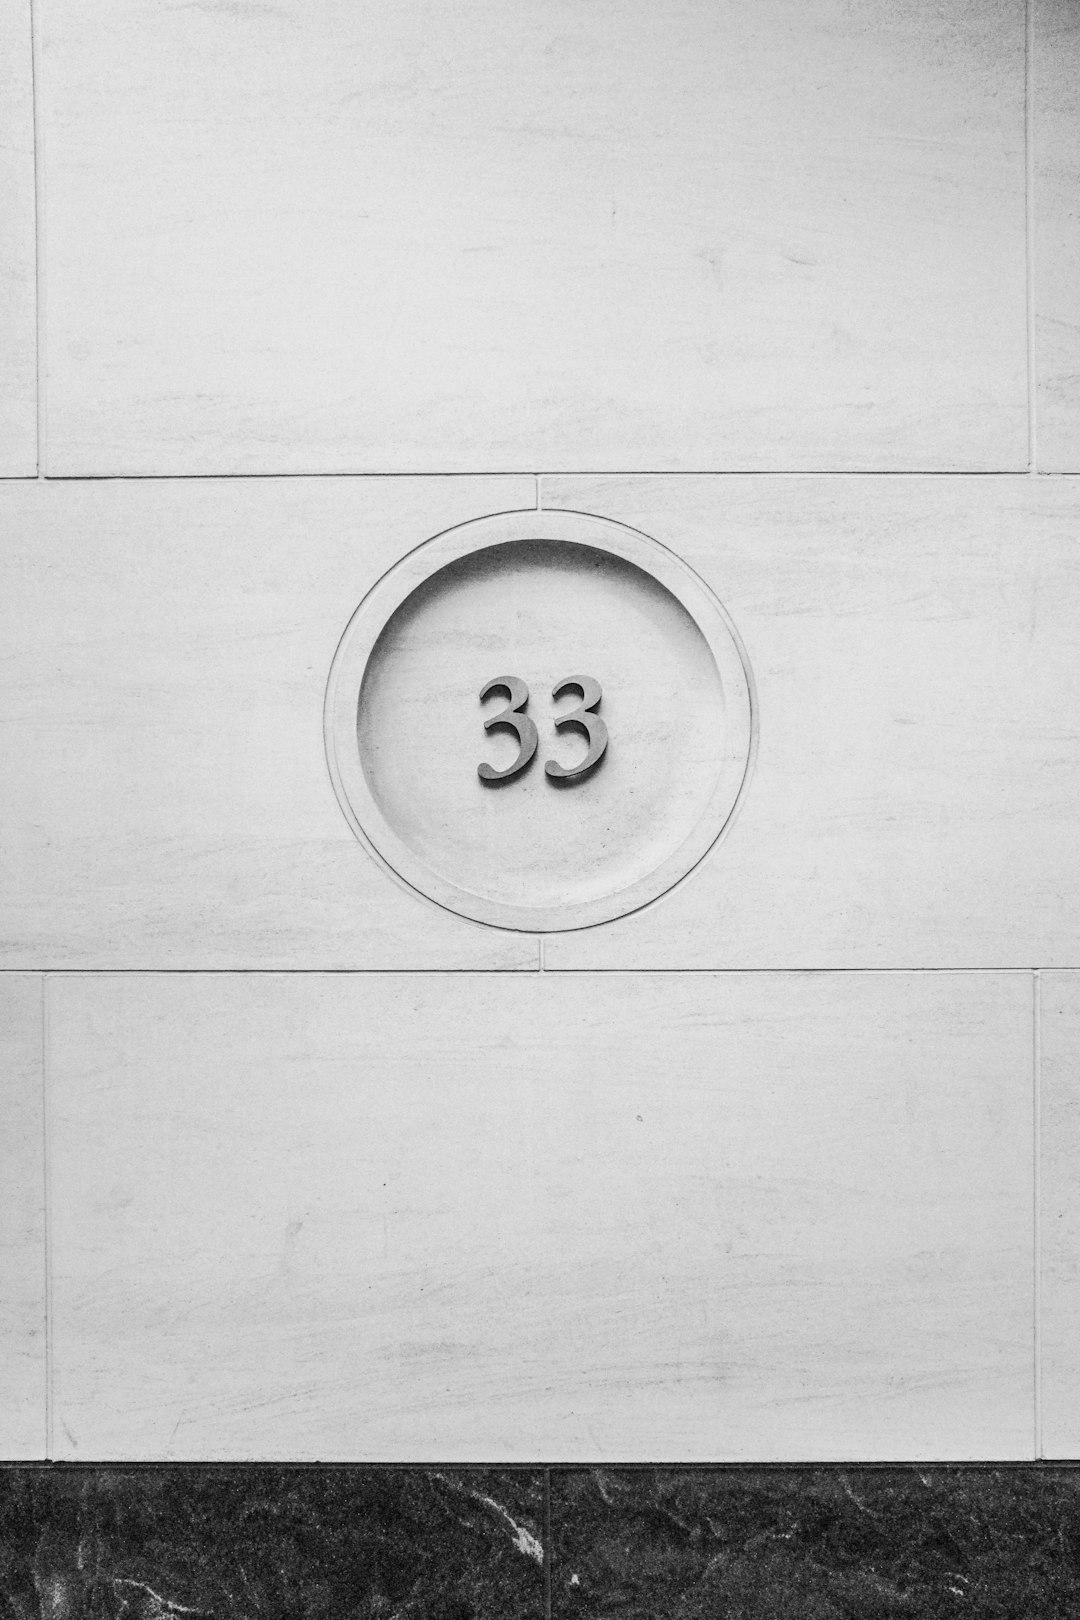 Walking through NYC i was fascinated by the beautiful geometric arrangement of the house numbers.